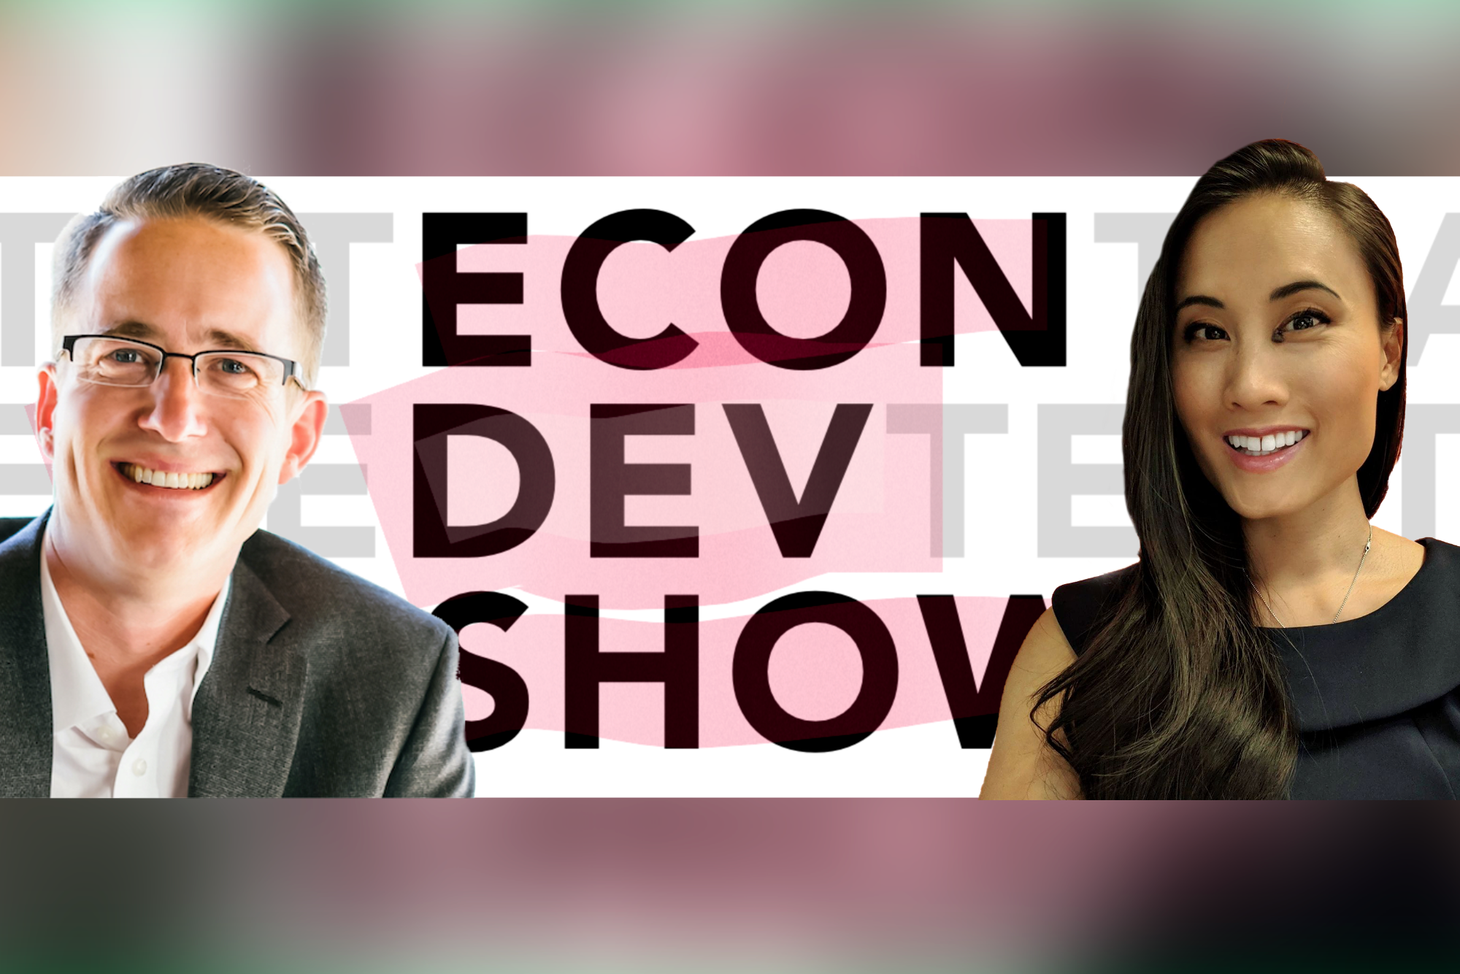 Podcast Episode 70 - Digital Entrepreneurial Support and Ecosystem Building with Jenny Poon